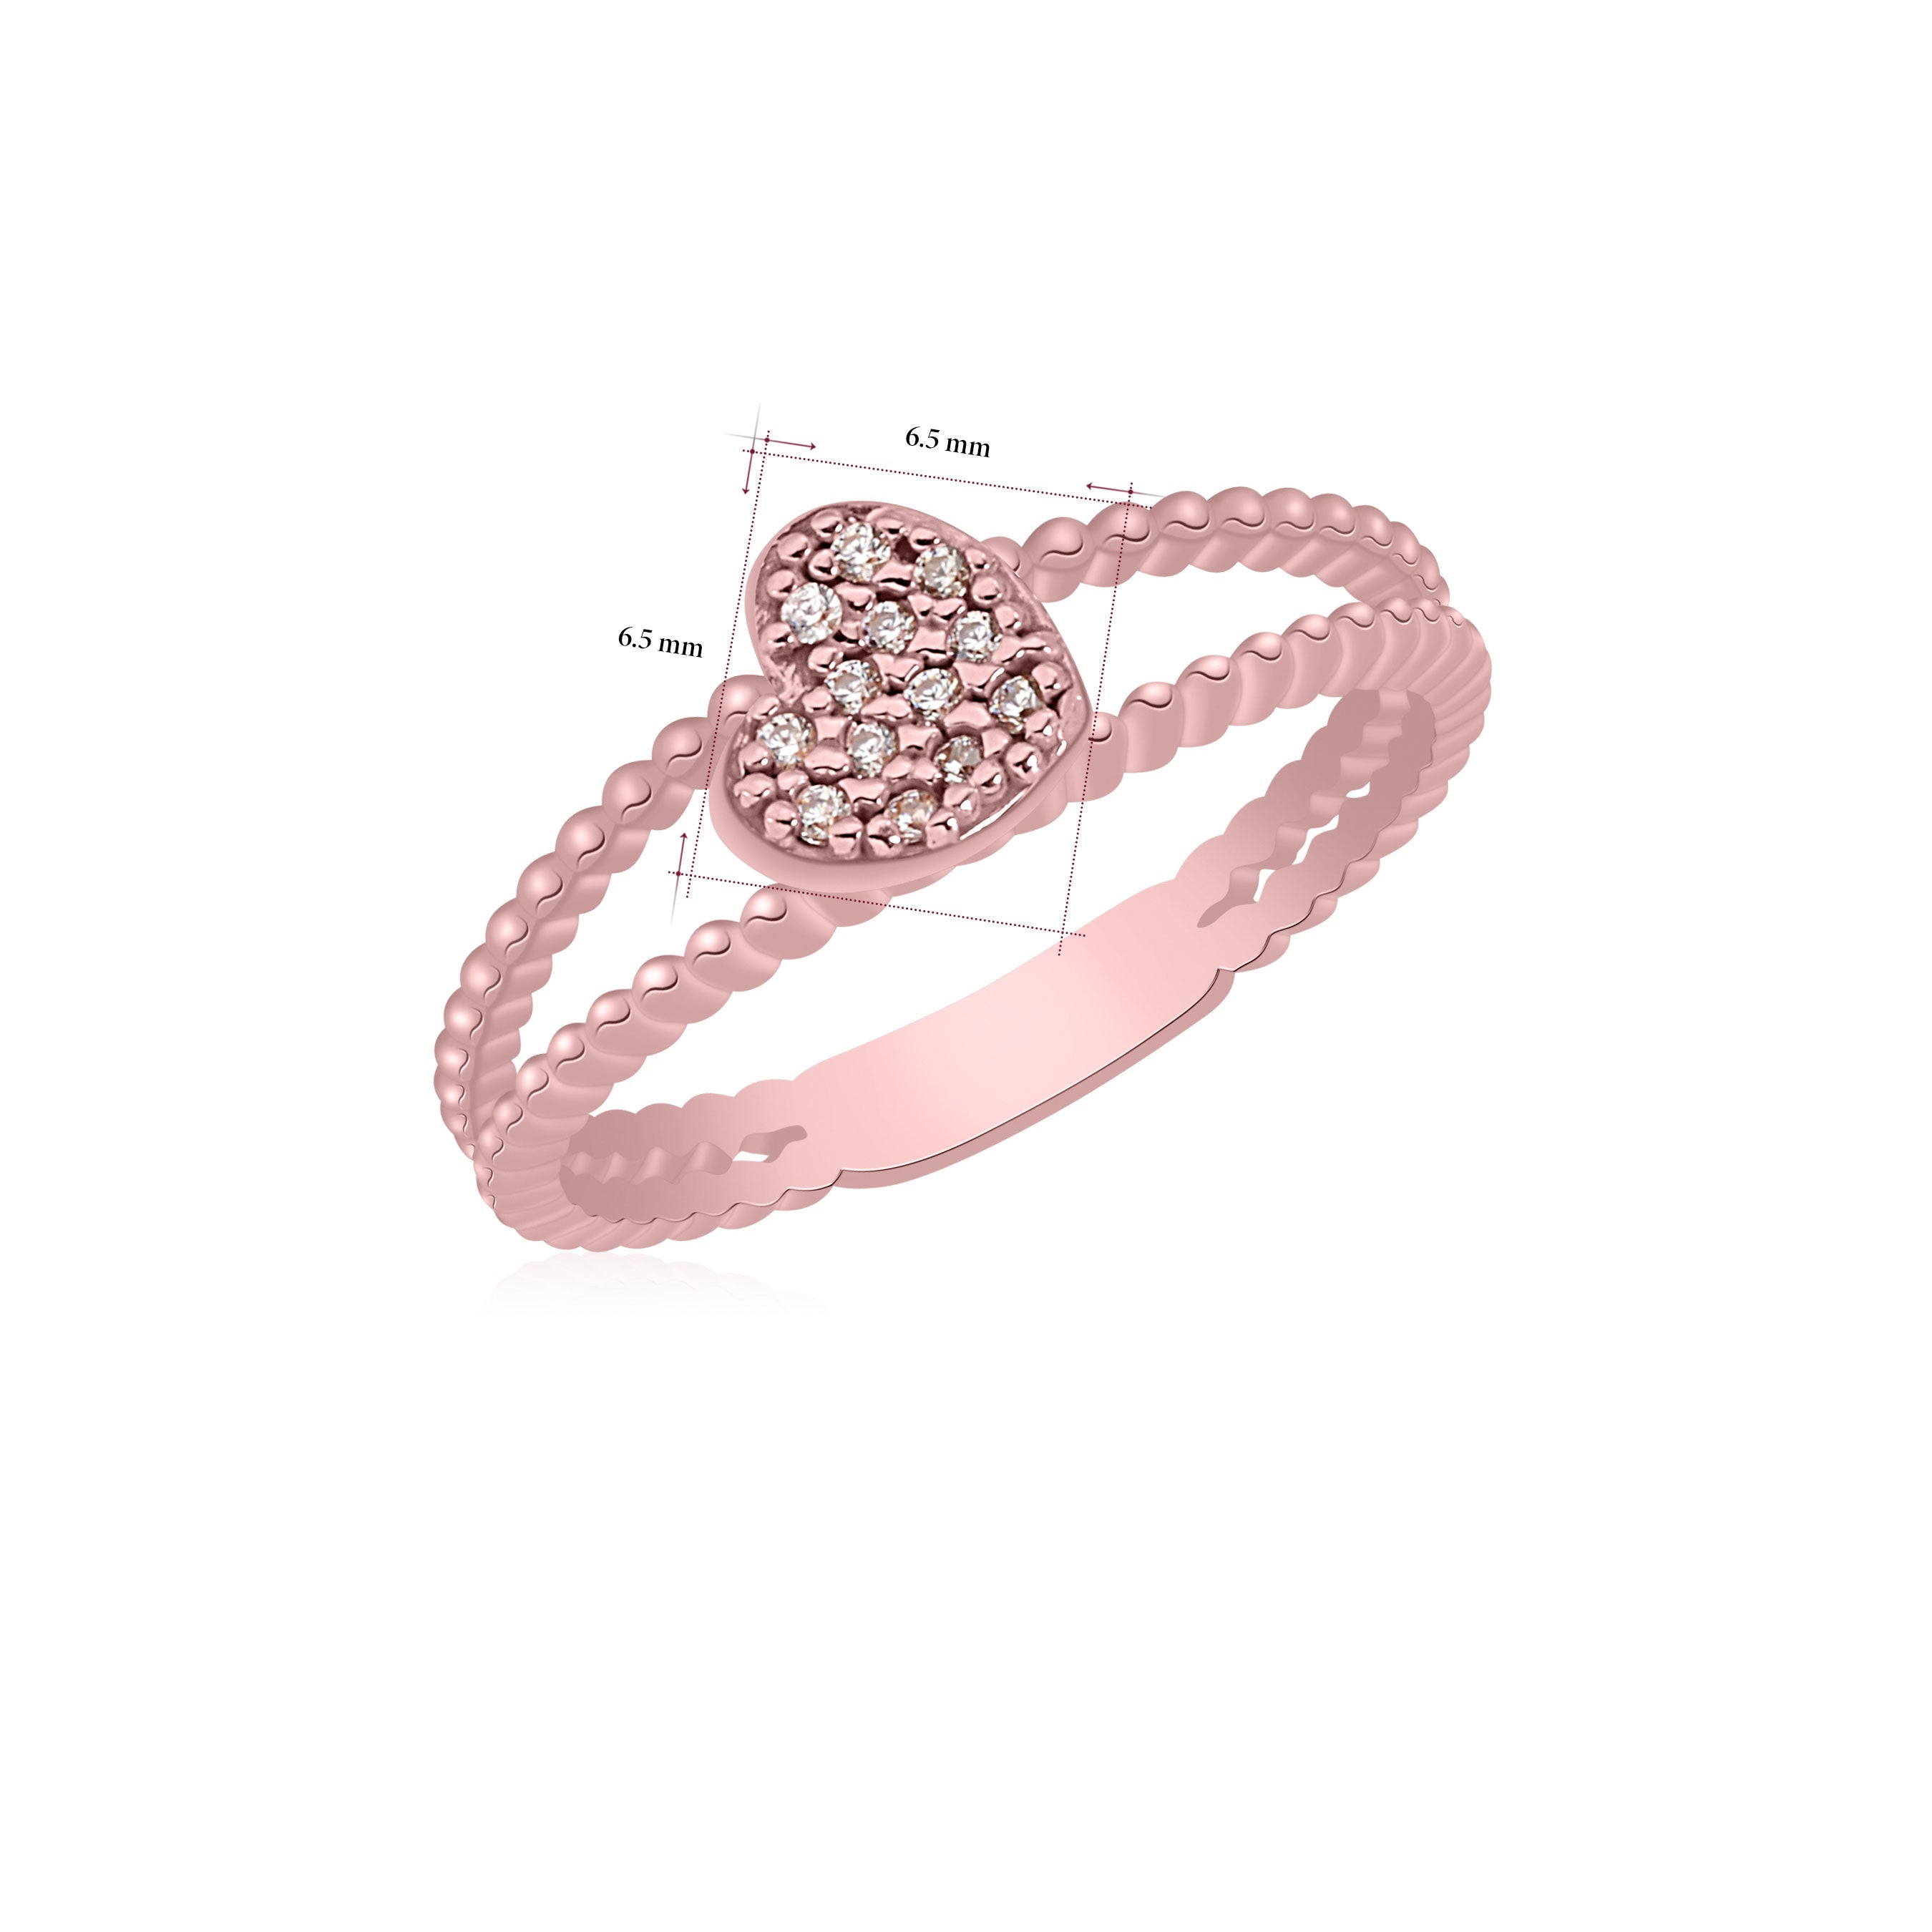 UNICORNJ 14K Rose Gold Double Band Beaded Ring with Pave CZ Heart Accent Italy